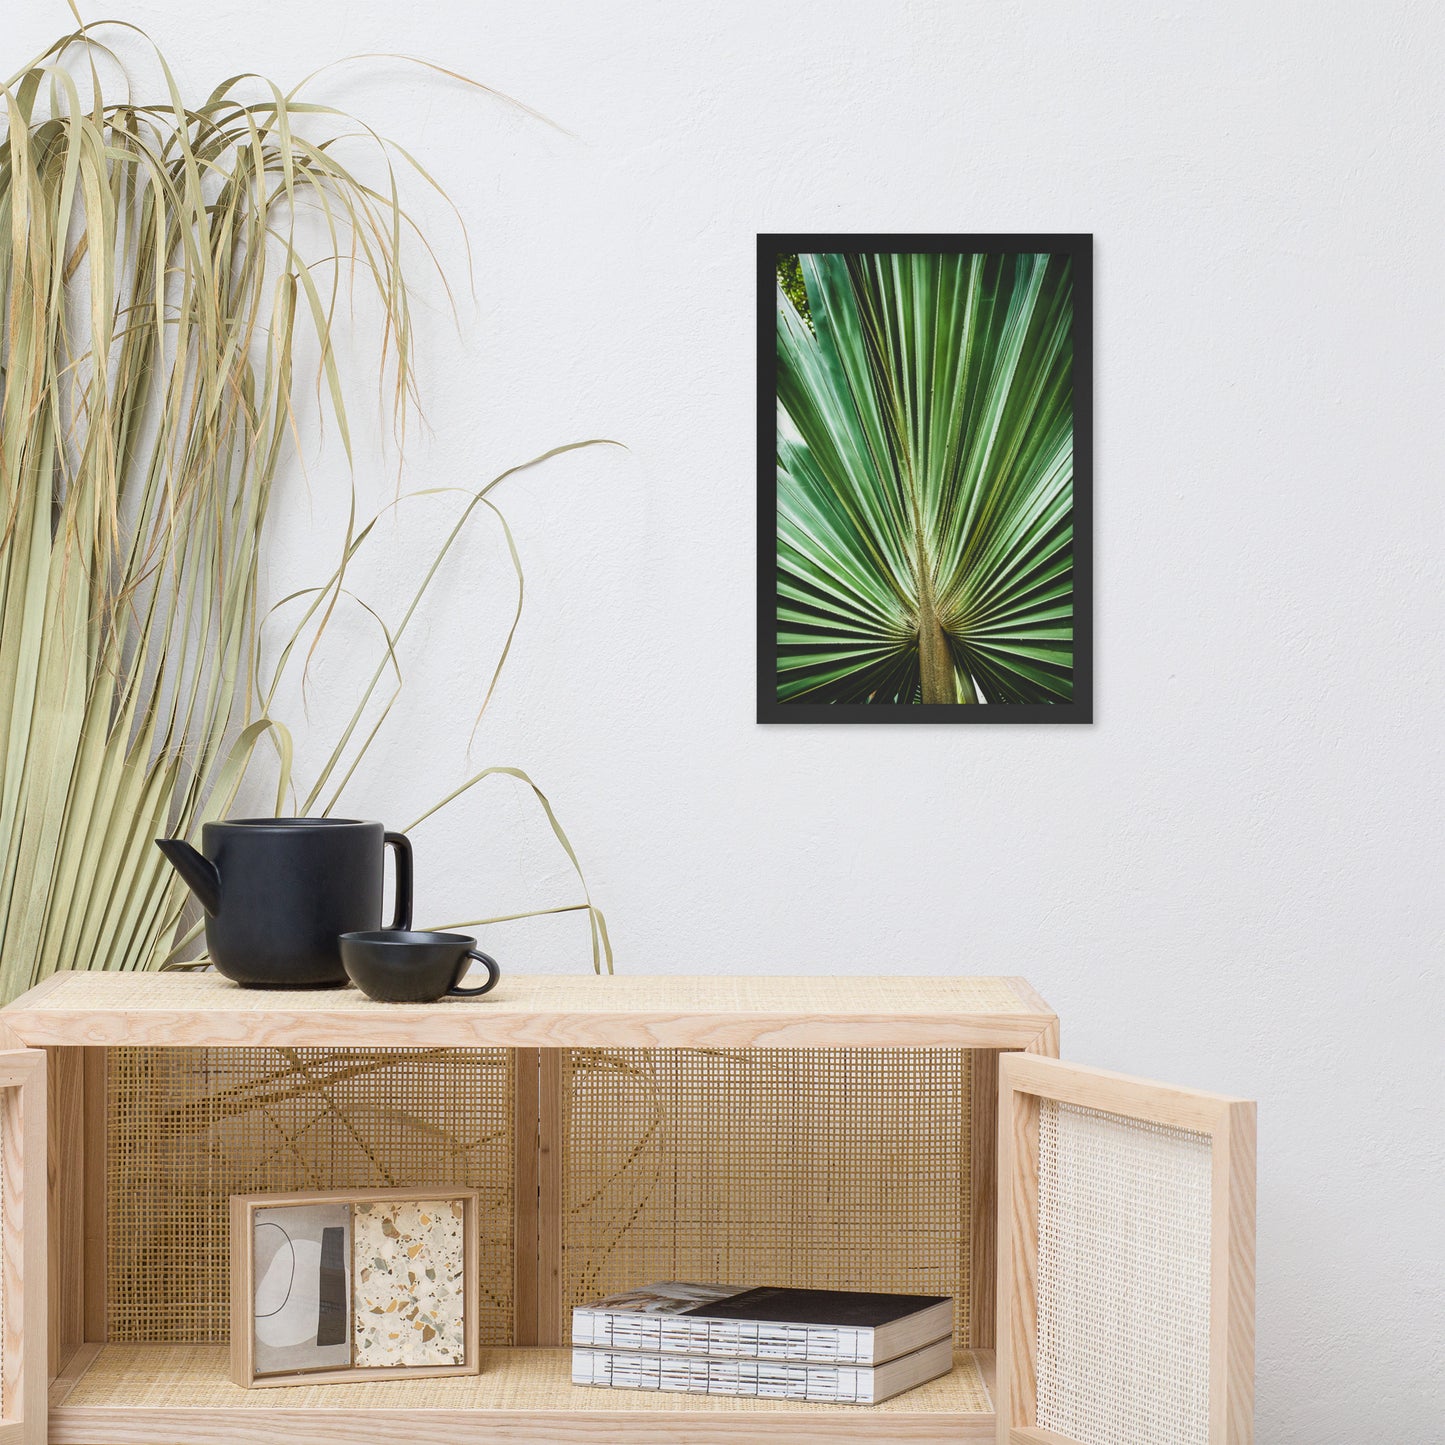 Framed Prints For Dining Room: Aged and Colorized Wide Palm Leaves 2 Tropical Botanical / Nature Photo Framed Wall Art Print - Artwork - Wall Decor